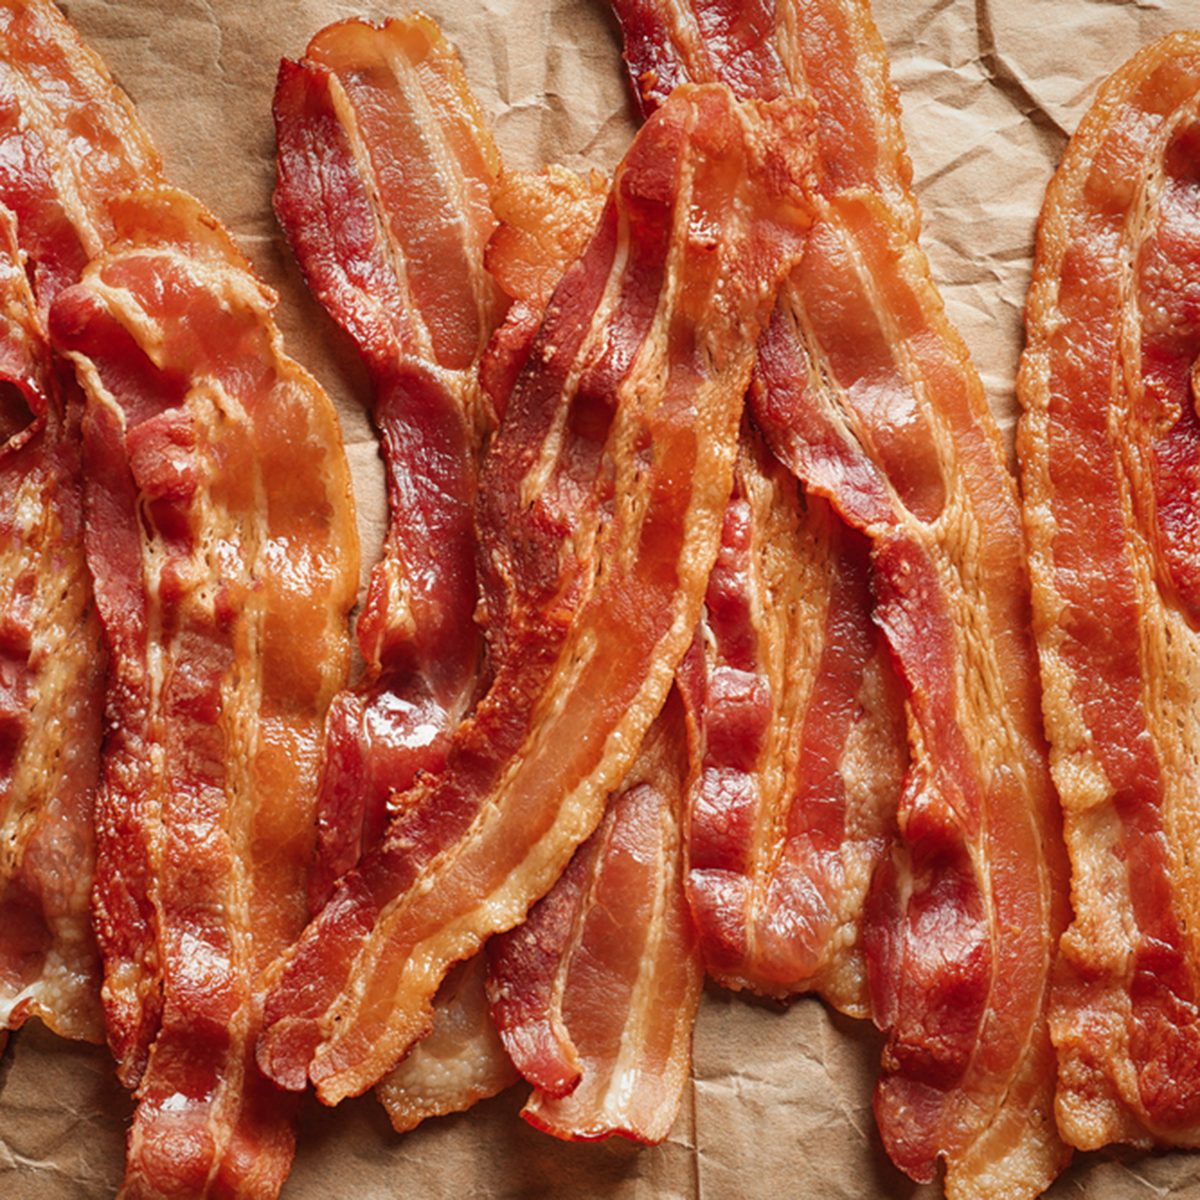 https://www.tasteofhome.com/wp-content/uploads/2018/08/cooked-bacon.jpg?fit=700%2C700